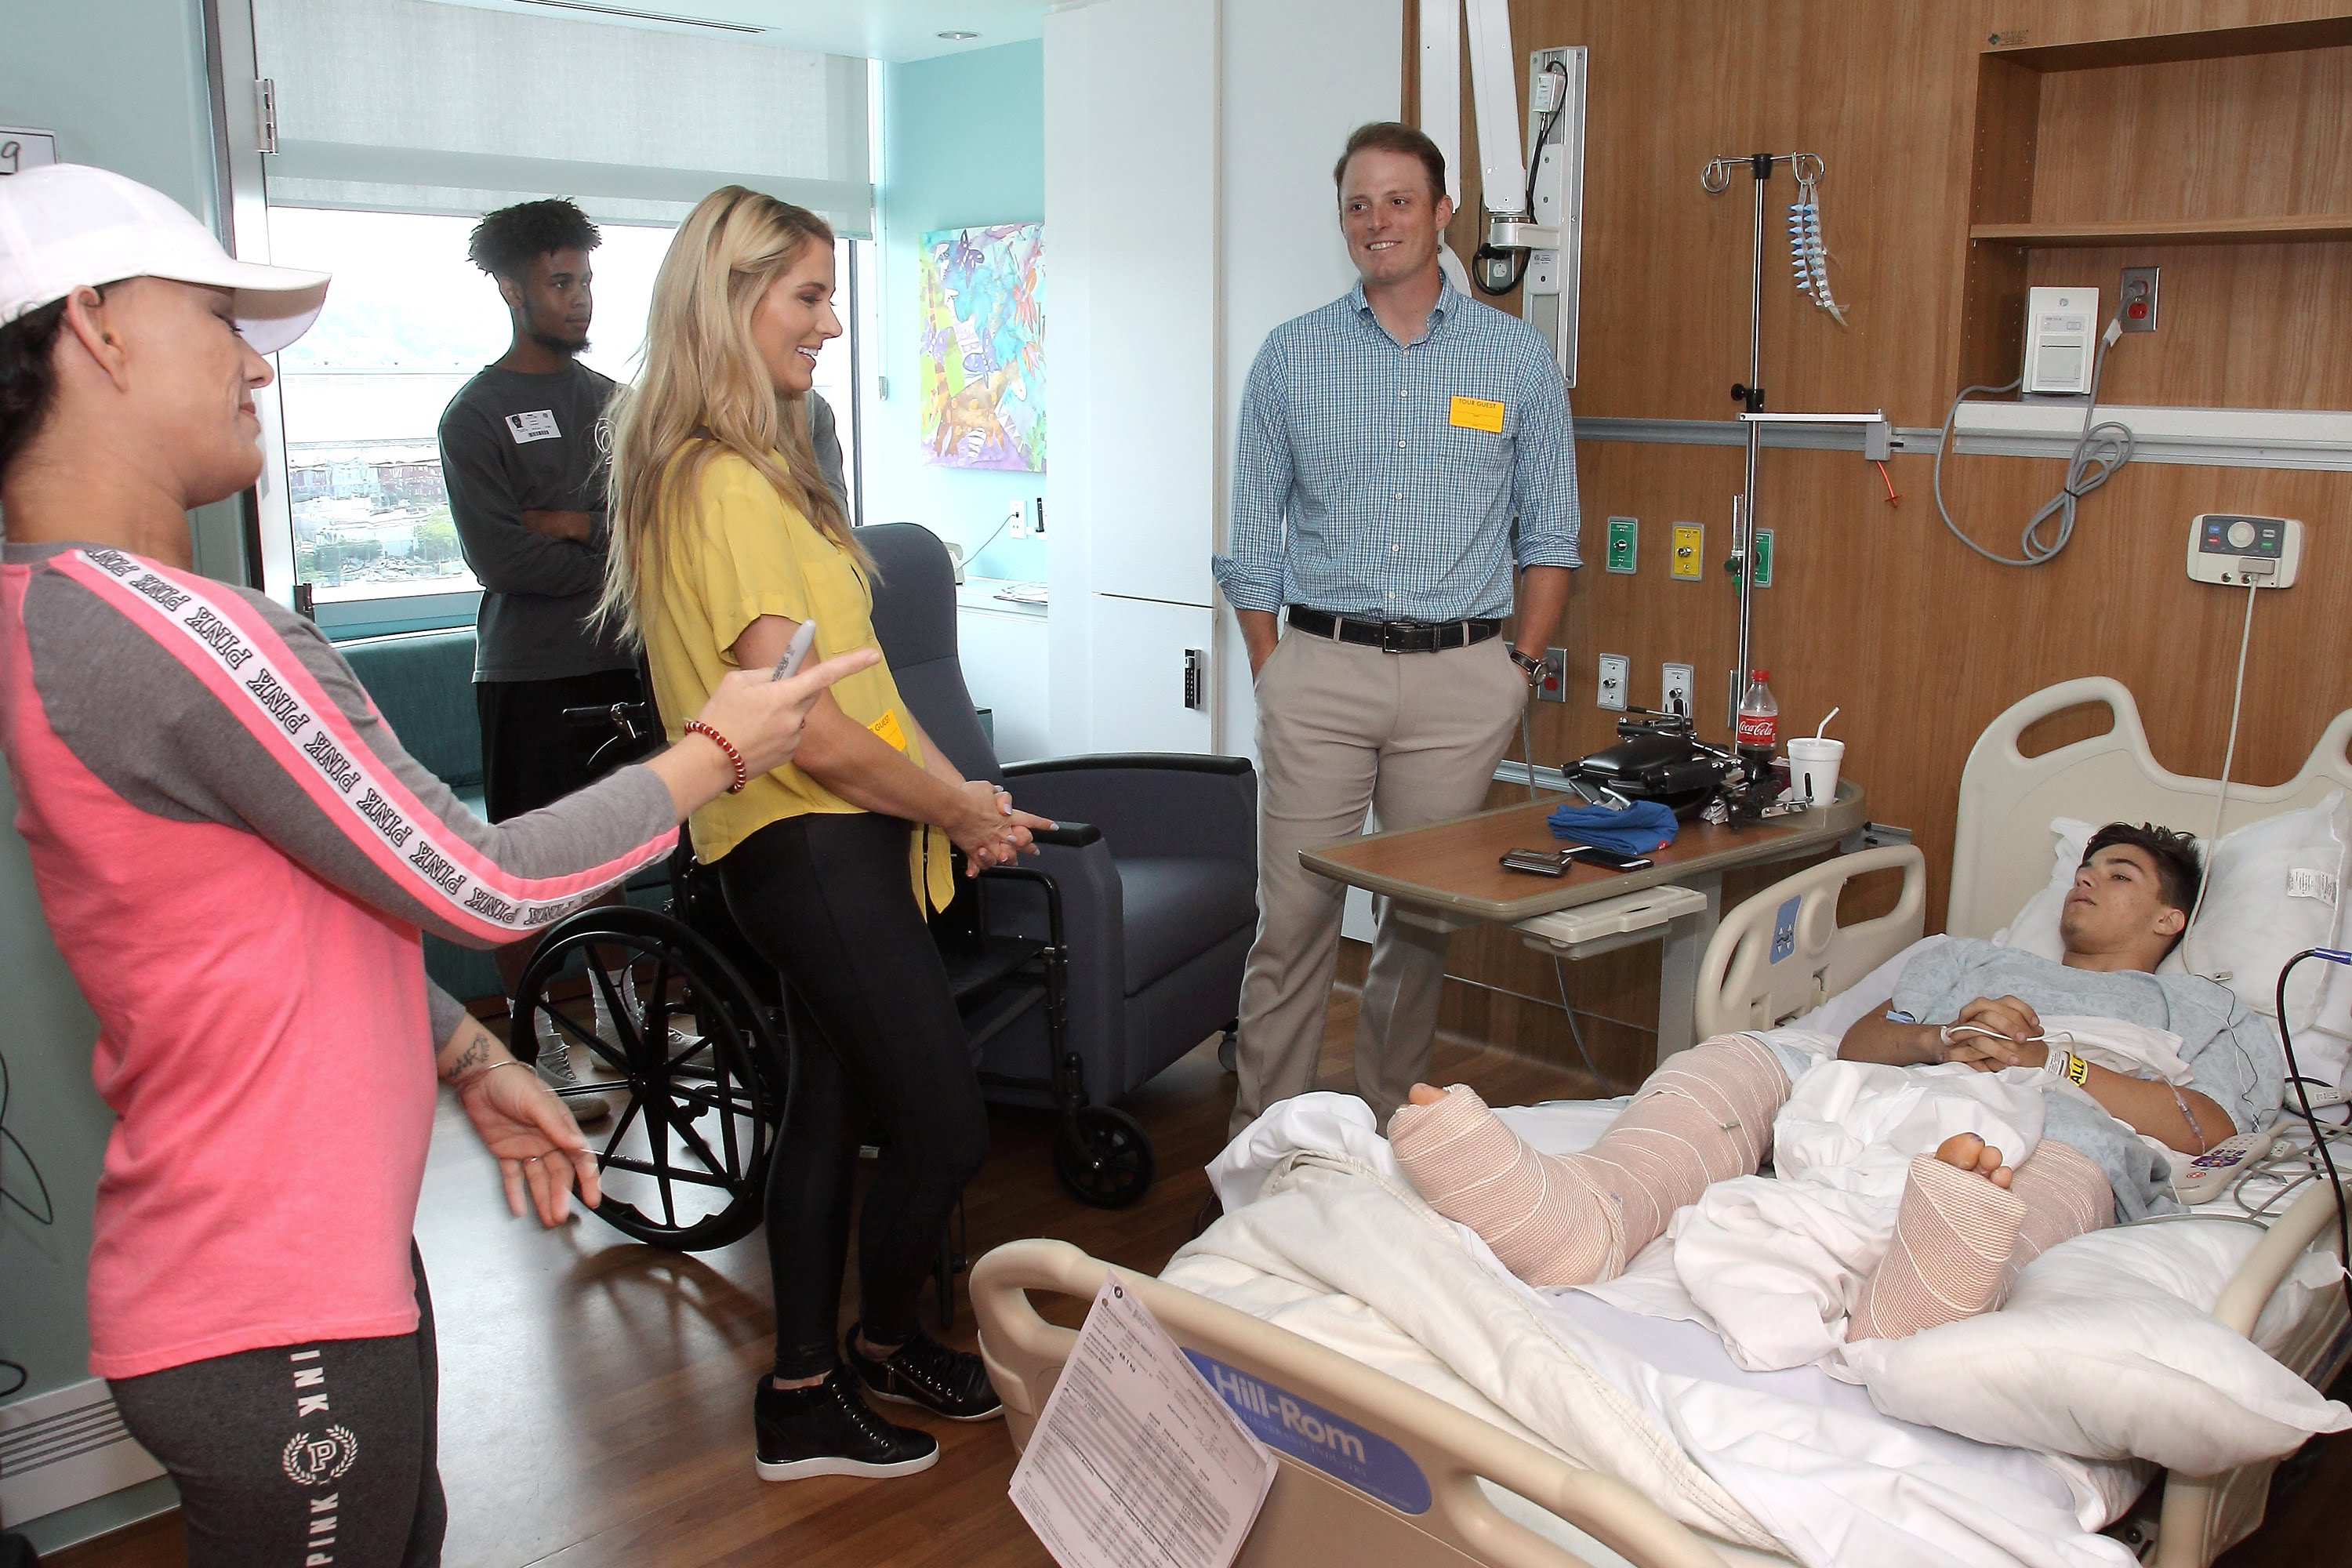 ESPN’s Greg McElroy and Laura Rutledge visit a patient